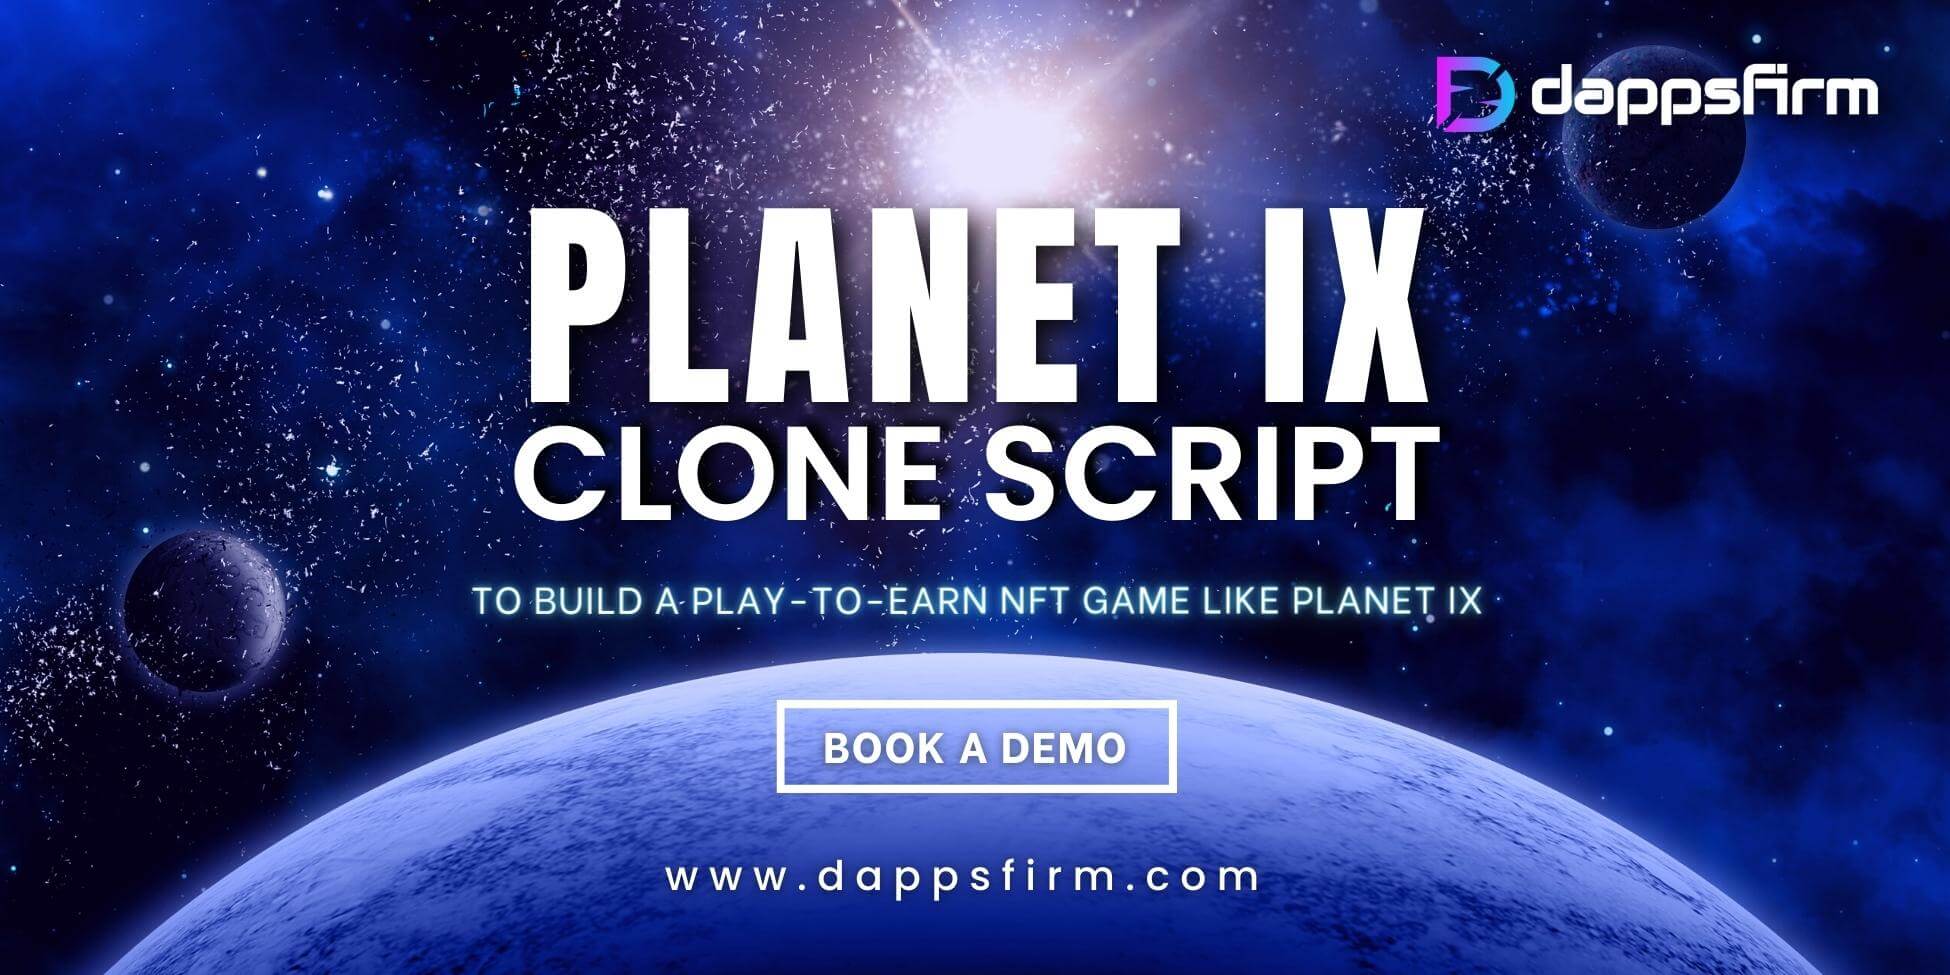 Planet IX Clone Script To Create an NFT-based Strategy Gaming Platform Like Planet IX Quickly